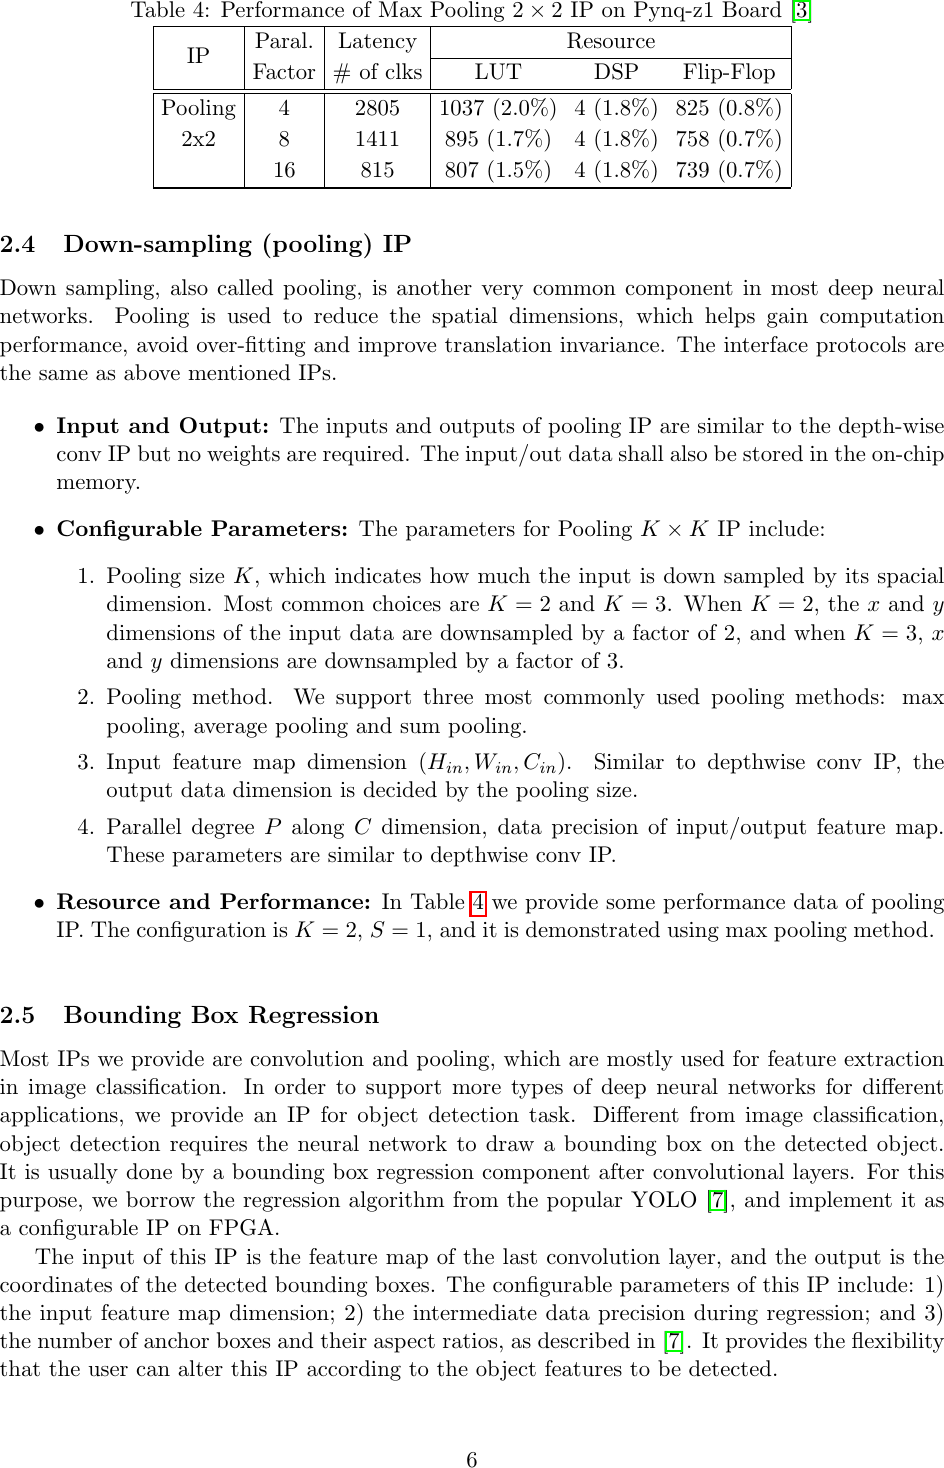 Page 6 of 10 - Open Source IP Manual